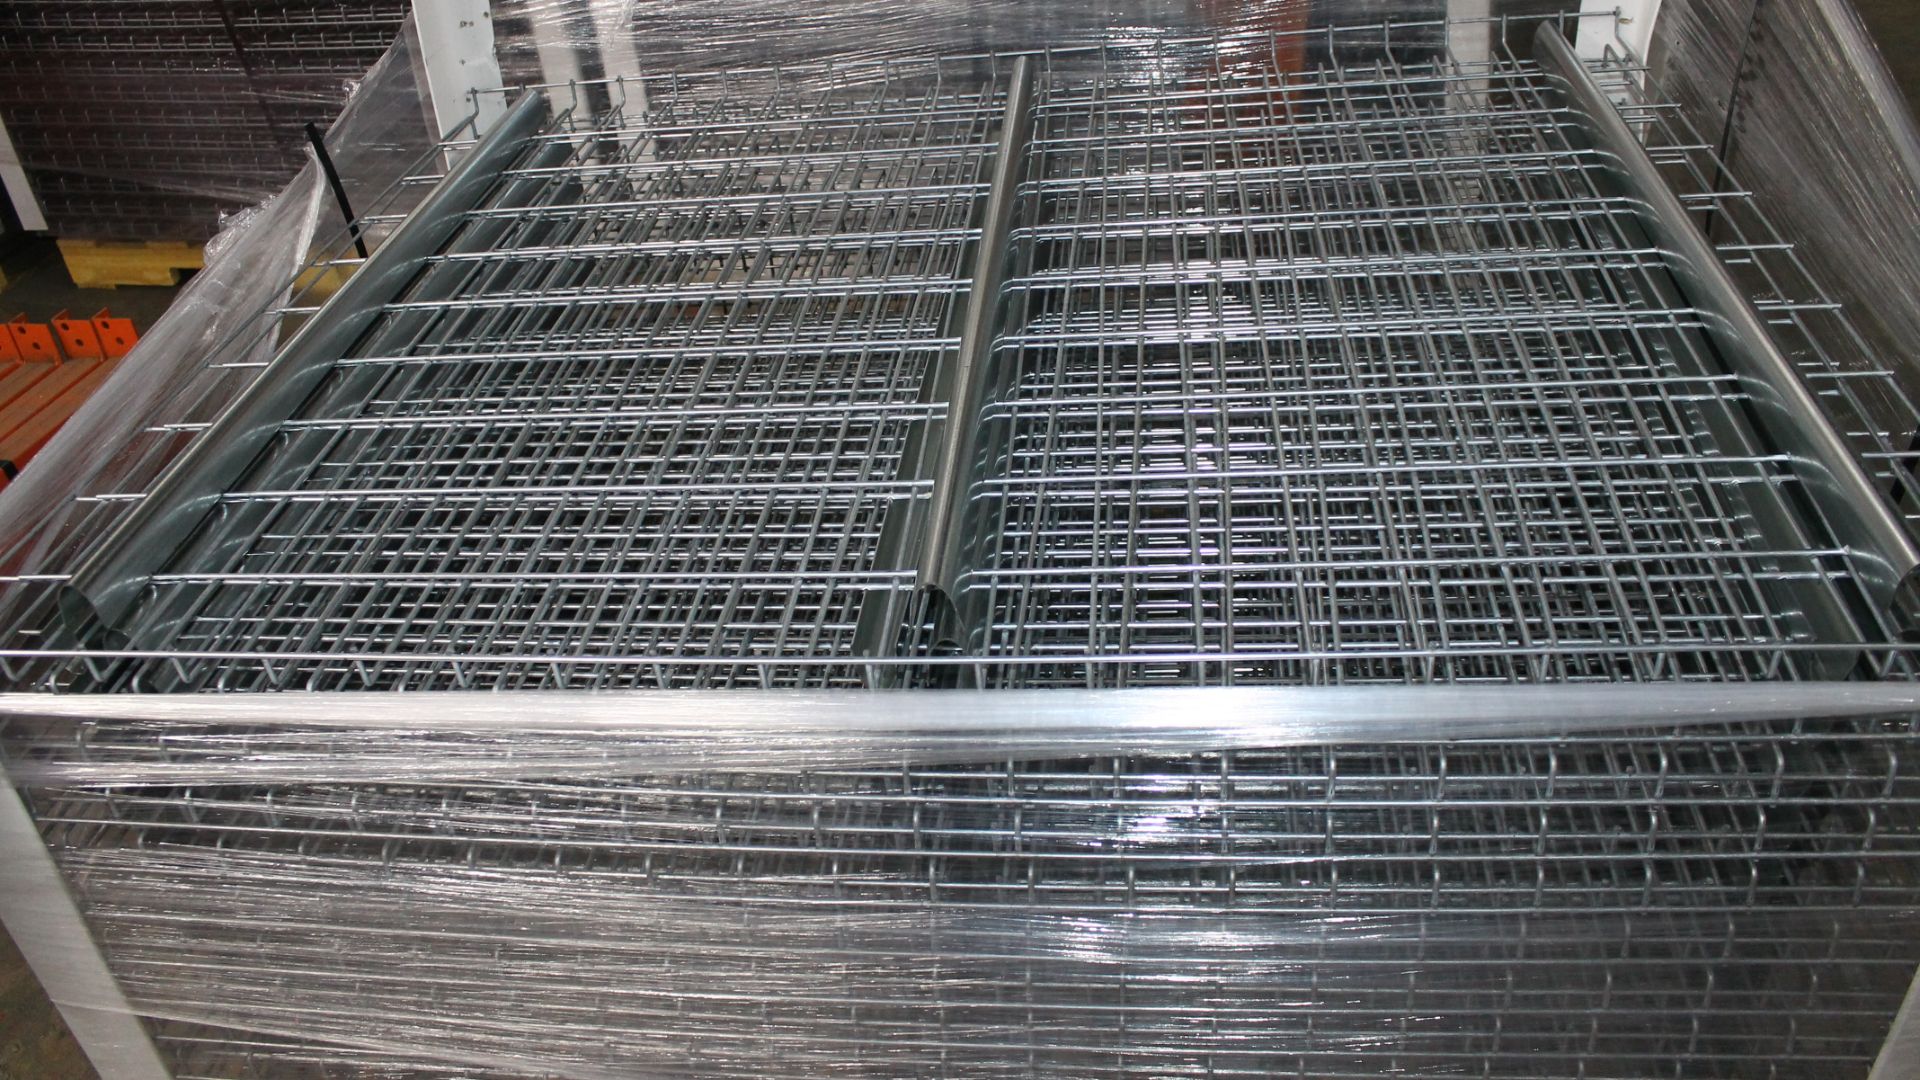 NEW 120 PCS OF STANDARD 42" X 53" WIREDECK - 2050 LBS CAPACITY - Image 2 of 3